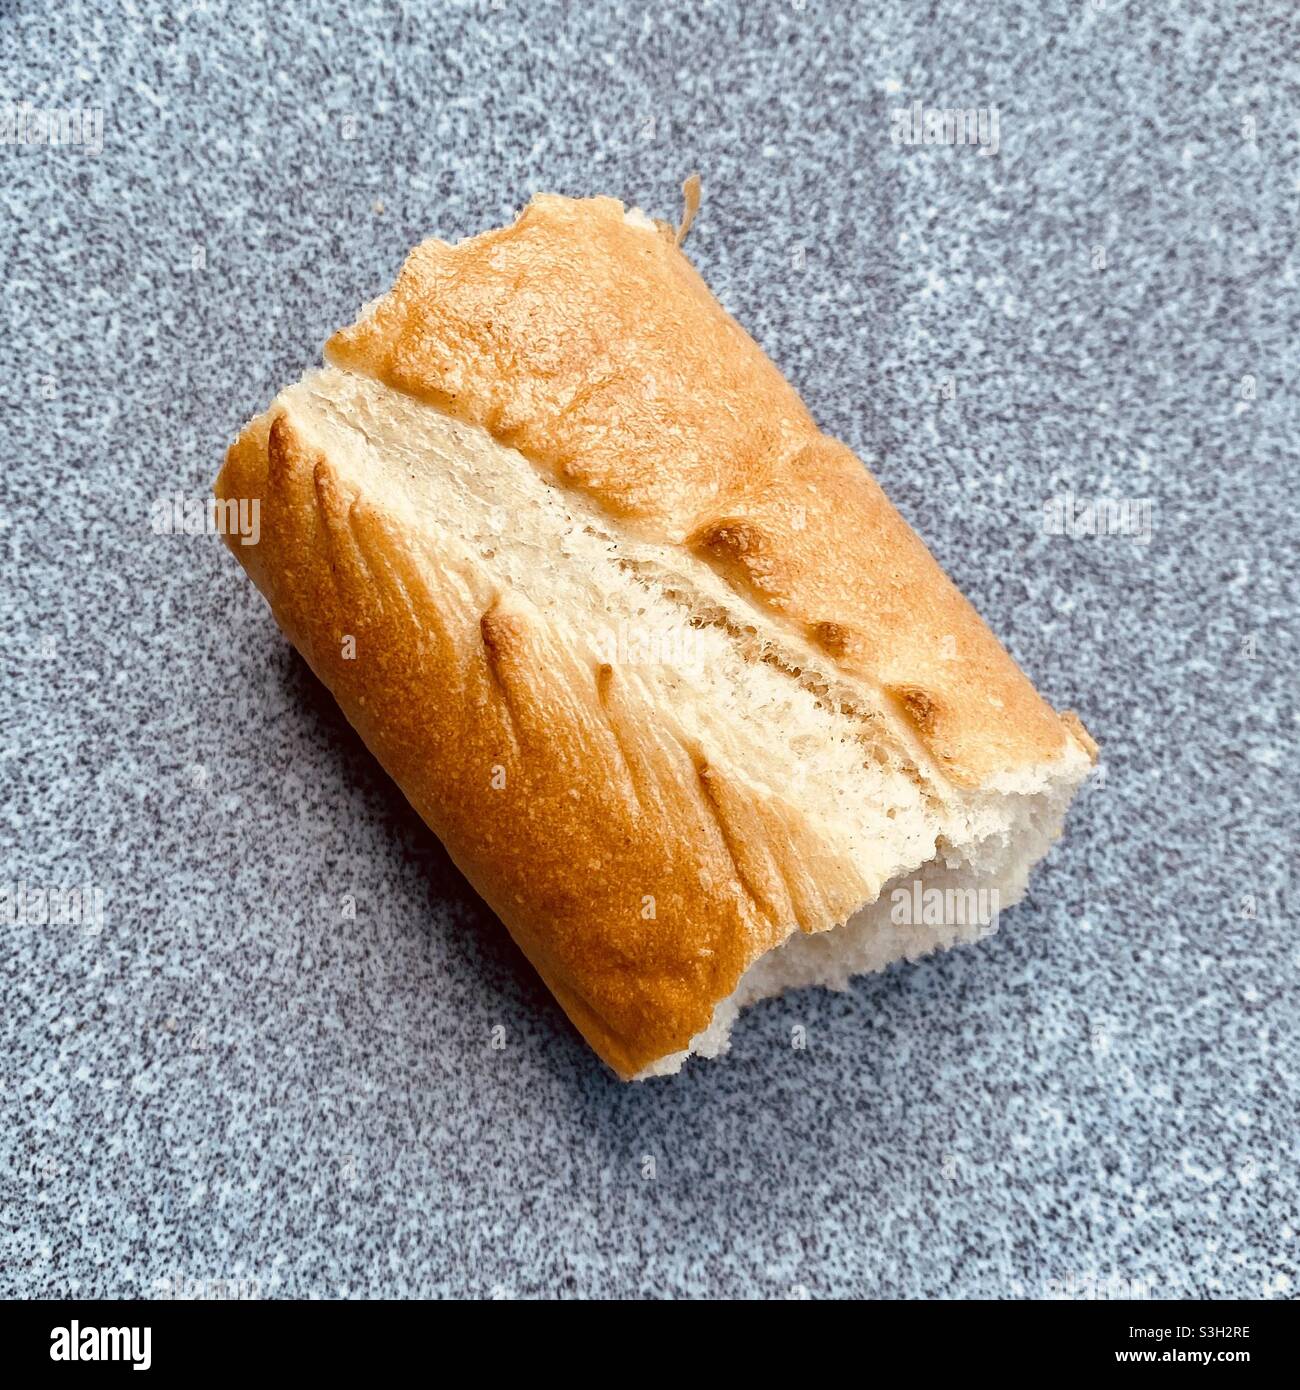 Piece of bread on a plate Stock Photo